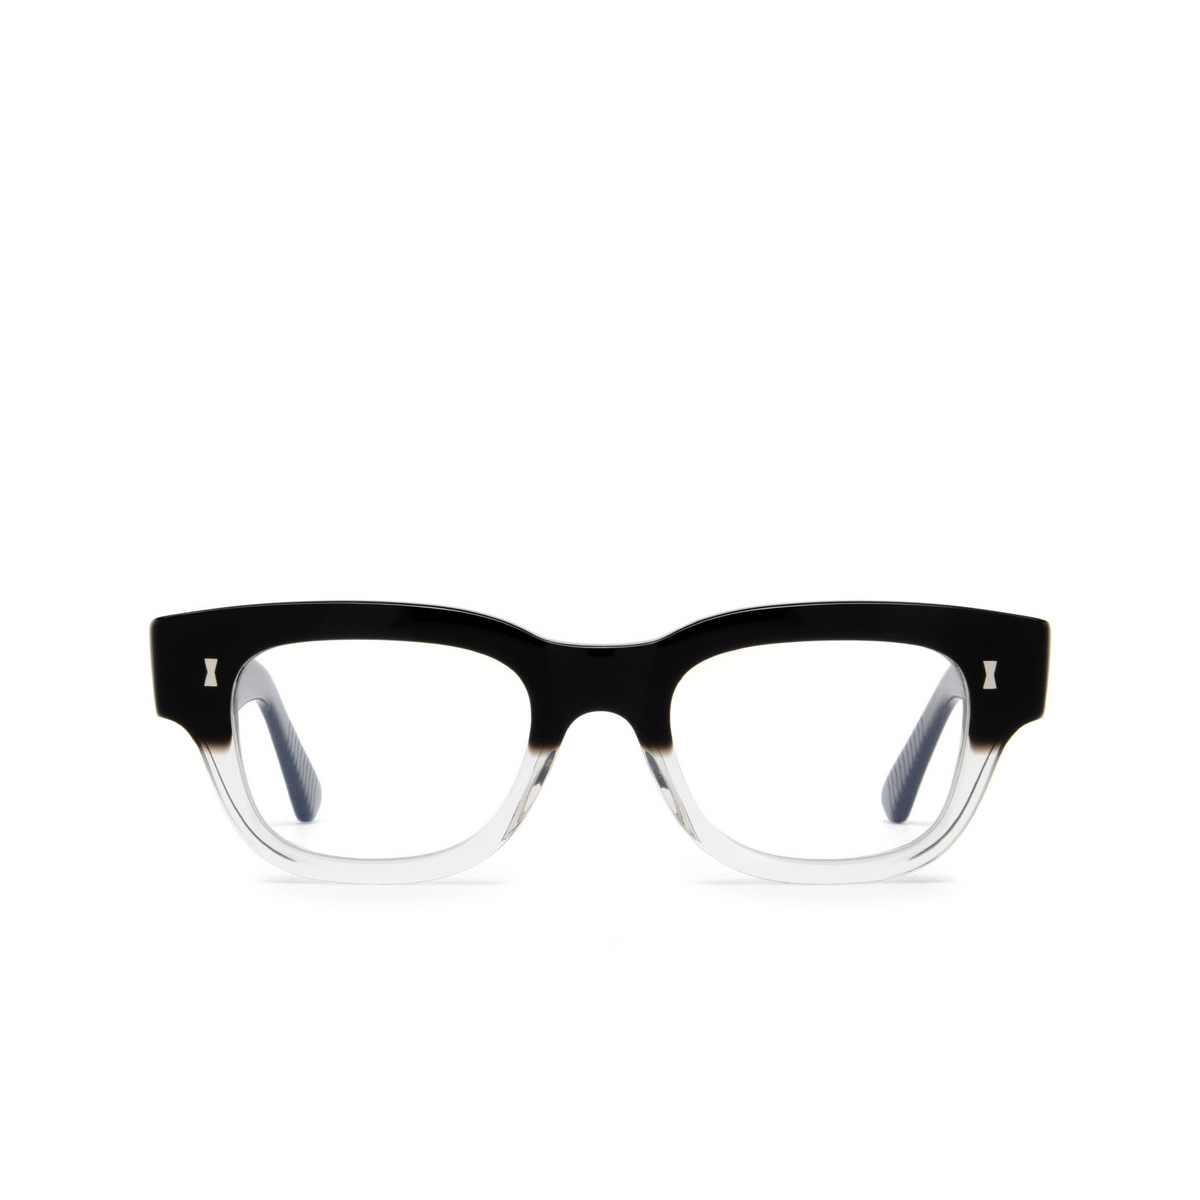 Cubitts FREDERICK Eyeglasses FRE-R-BLF Black Fade - front view